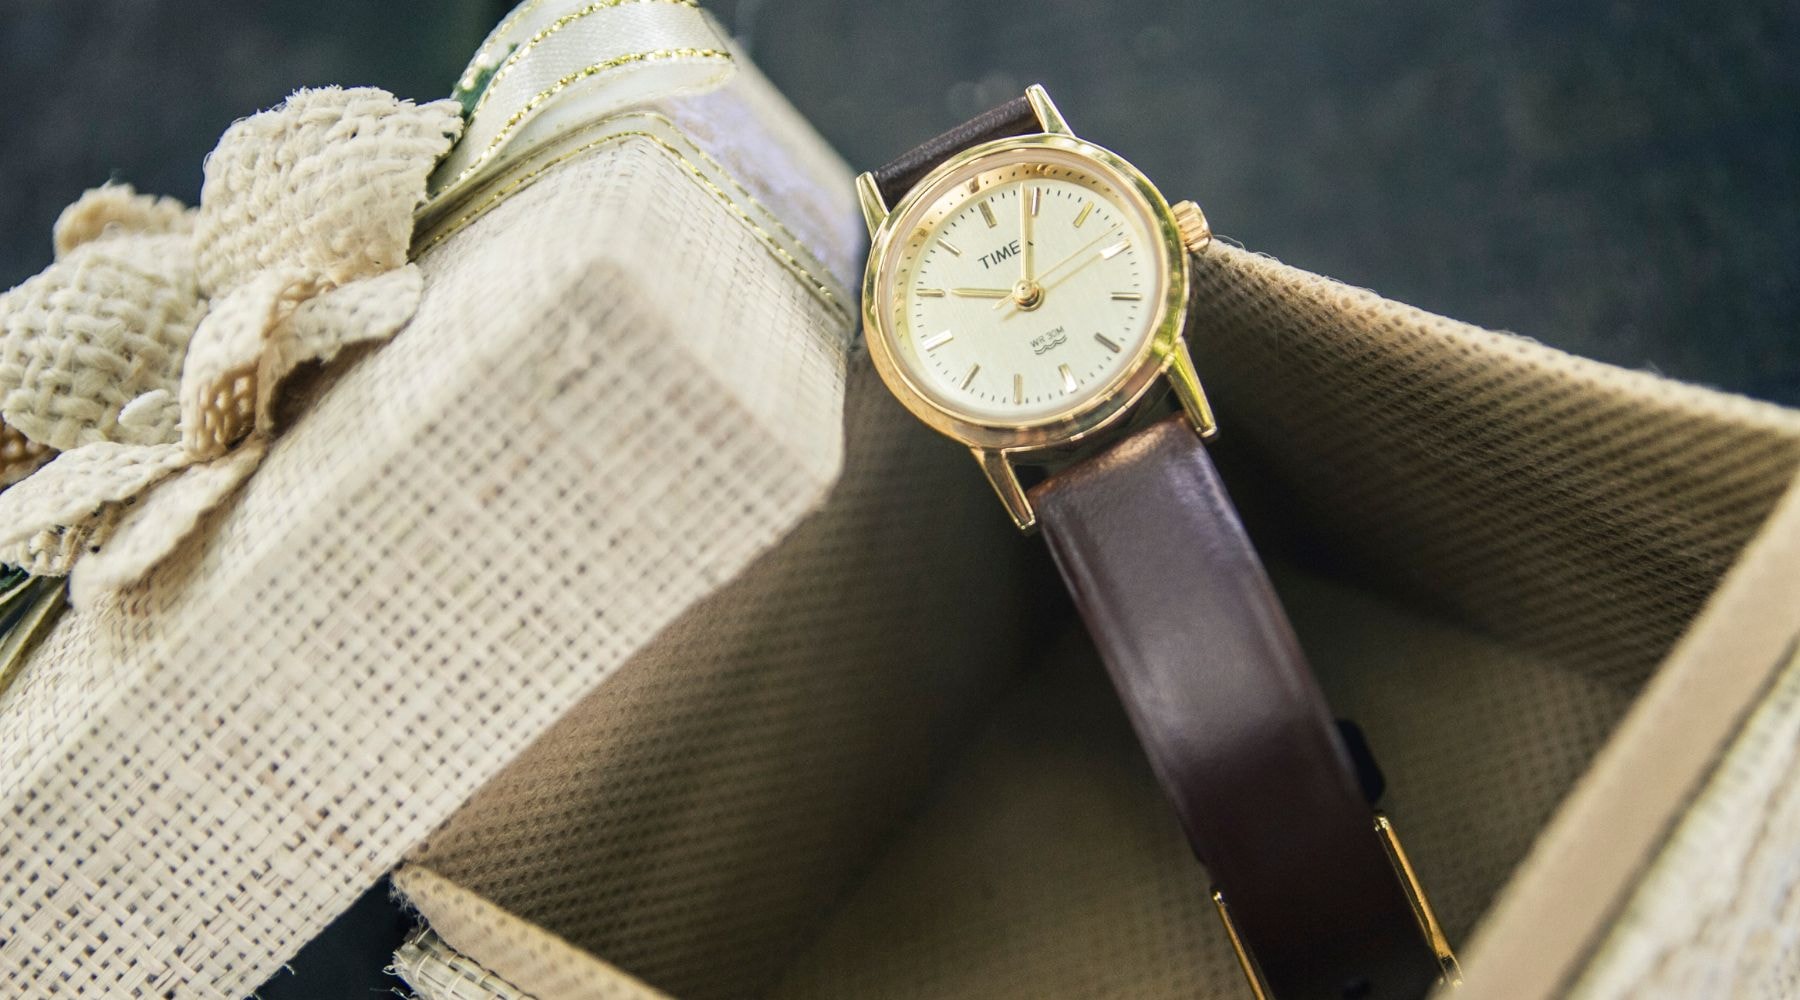 Classic wristwatch presented in a natural textured gift box with a white ribbon, symbolizing timeless elegance.